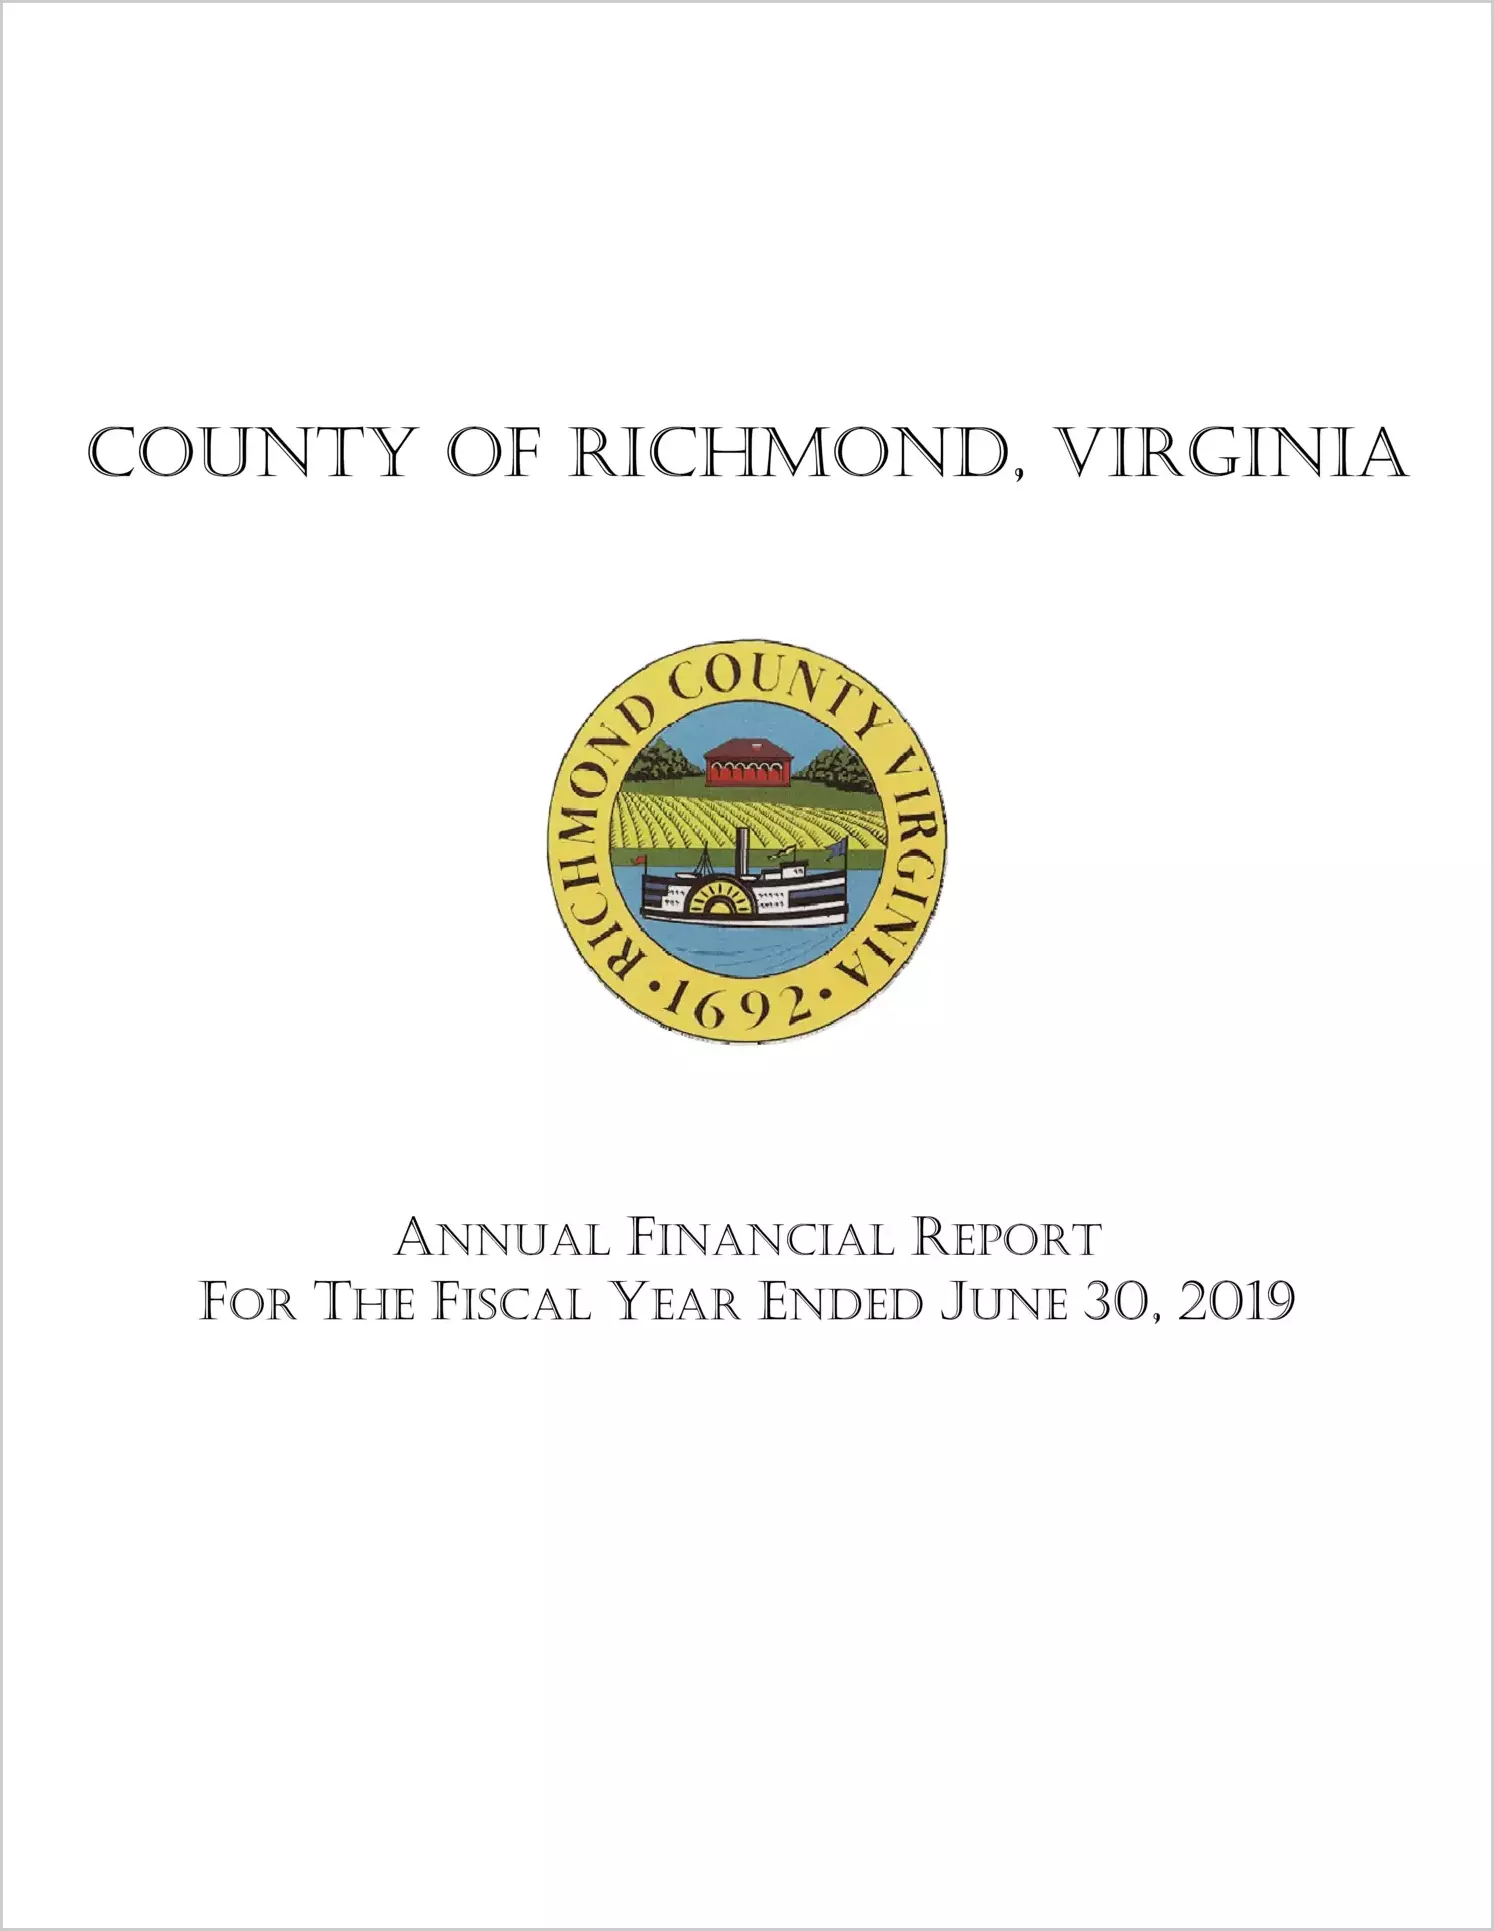 2019 Annual Financial Report for County of Richmond